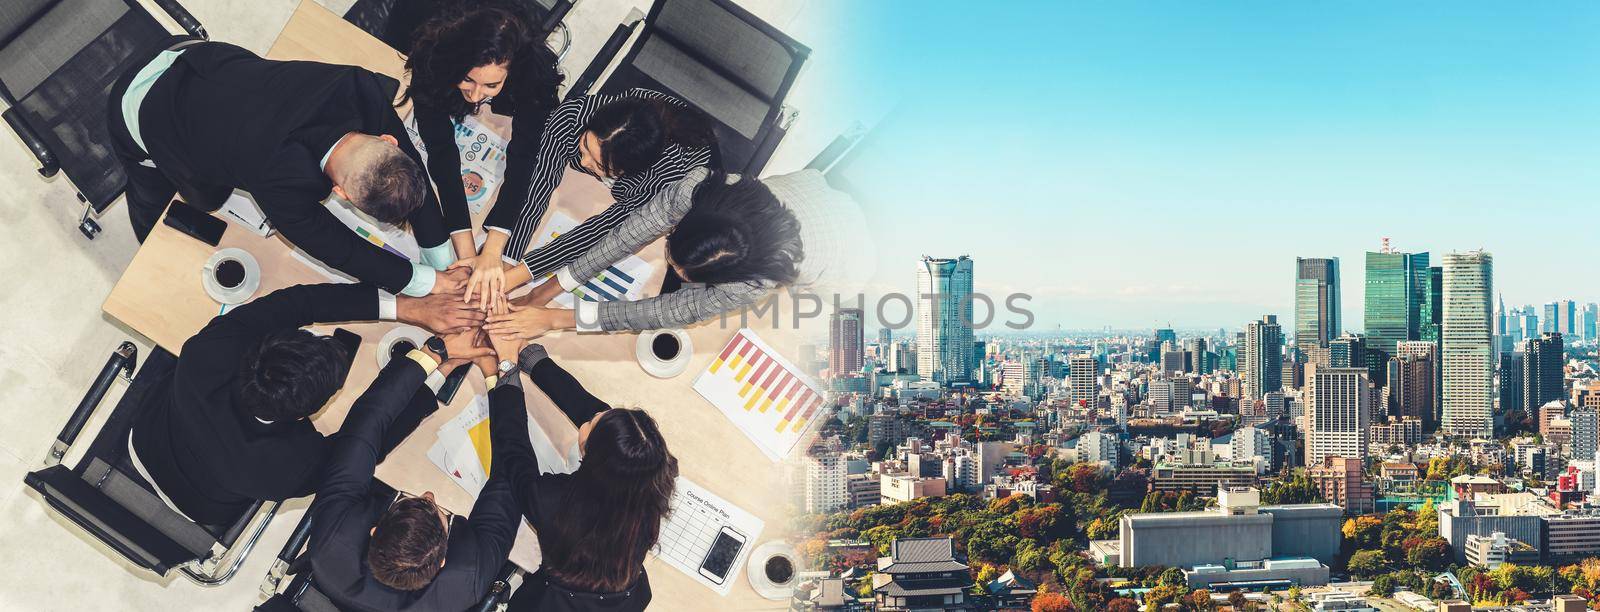 Happy business people celebrate teamwork success together with joy at office table shot from top view . Young businessman and businesswoman workers express cheerful victory in broaden view .